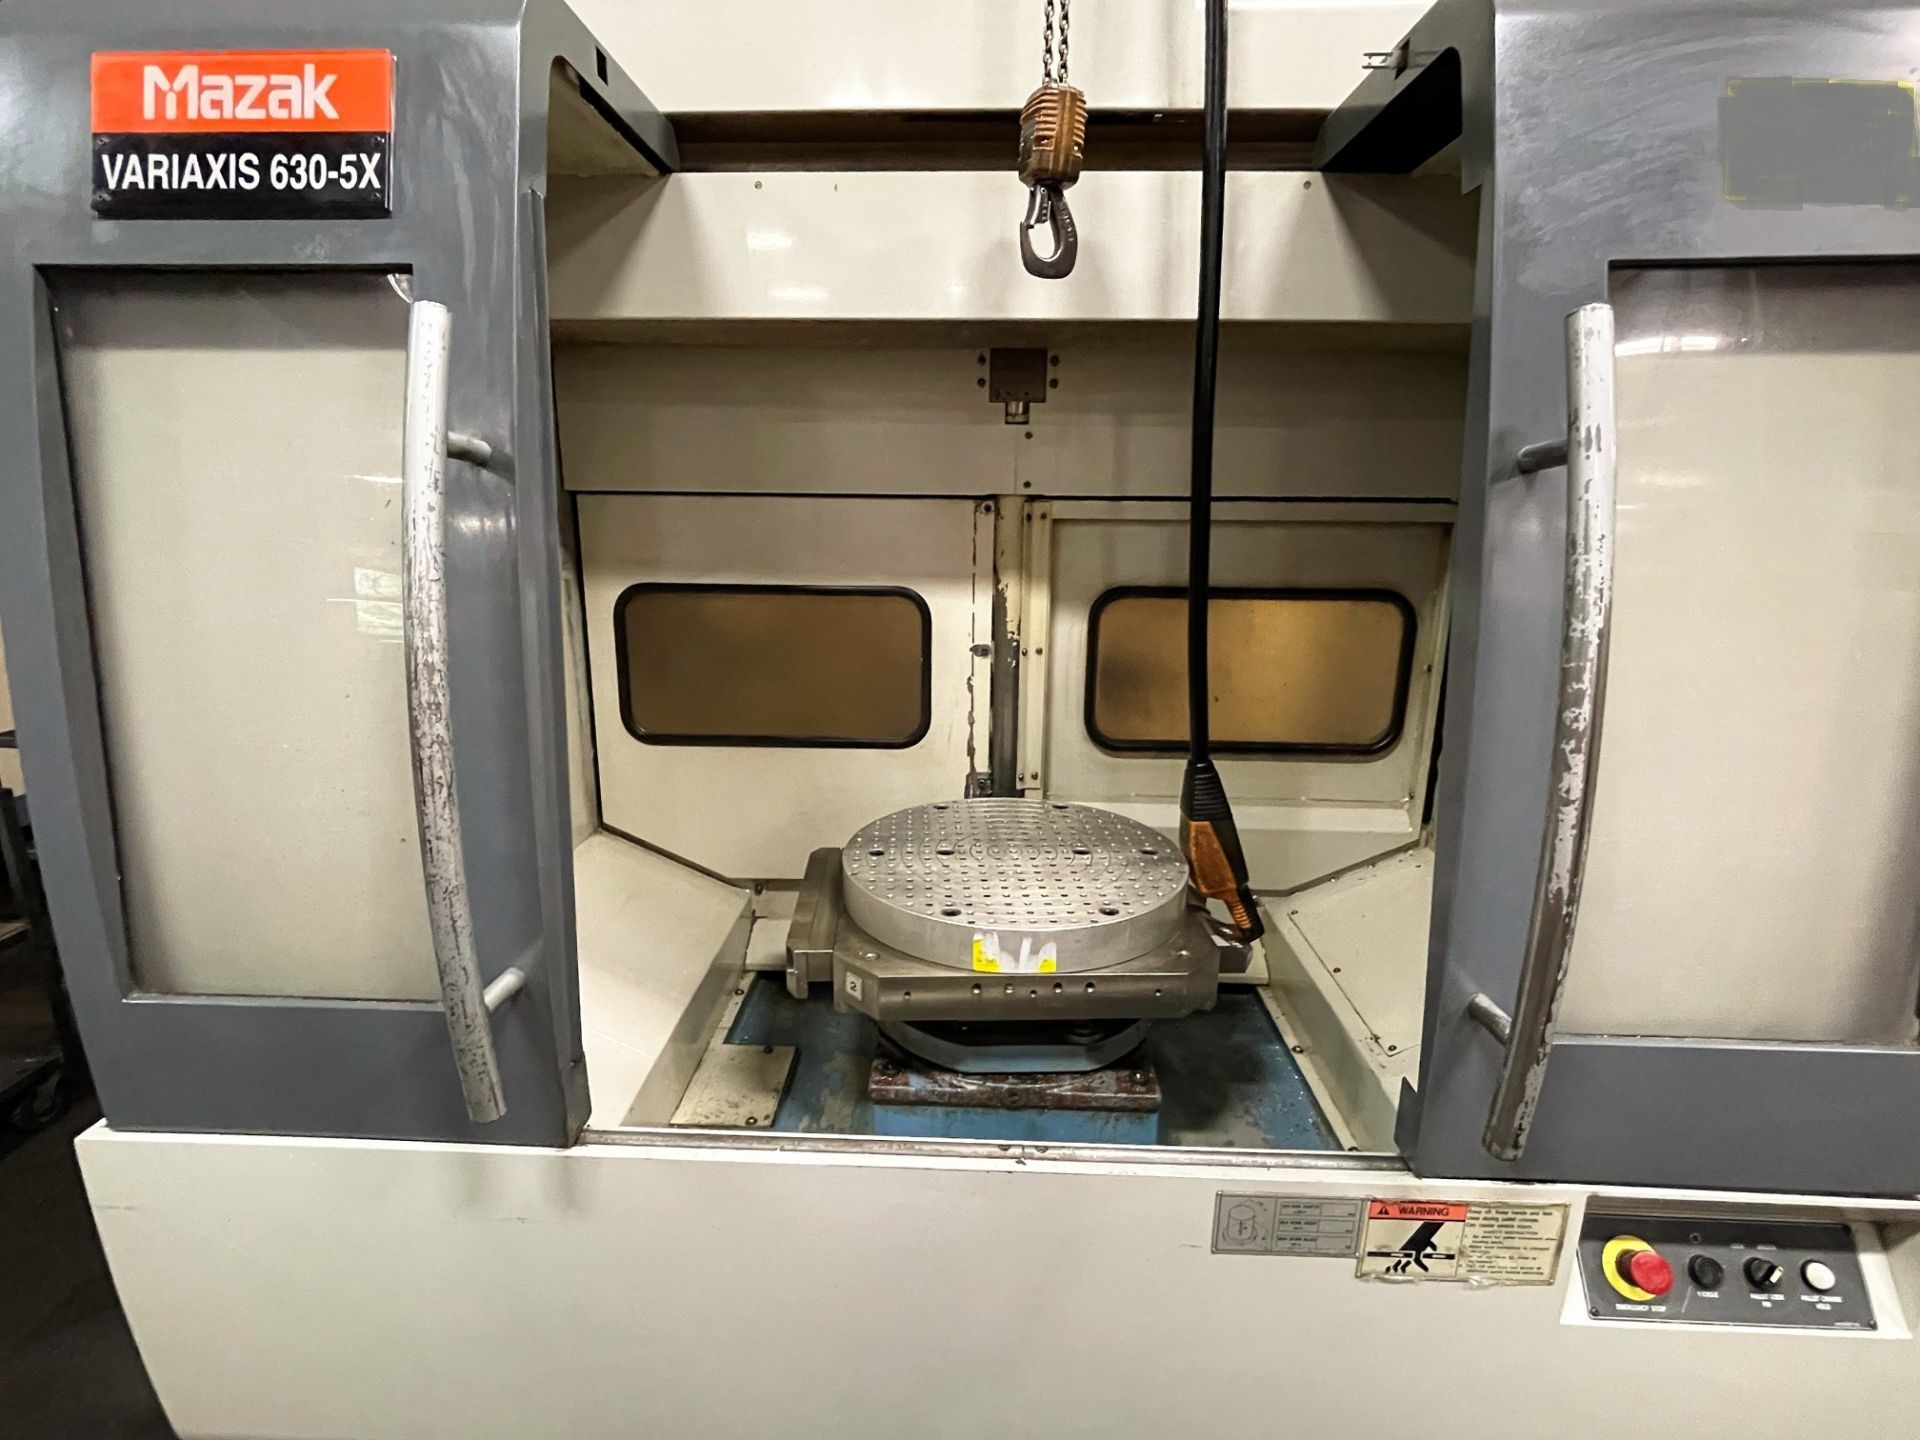 MAZAK VARIAXIS 630 5-AXIS CNC VERTIVAL MACHINING CENTER W/PALLET CHANGER, S/N 160371, NEW 2002 - Image 5 of 19